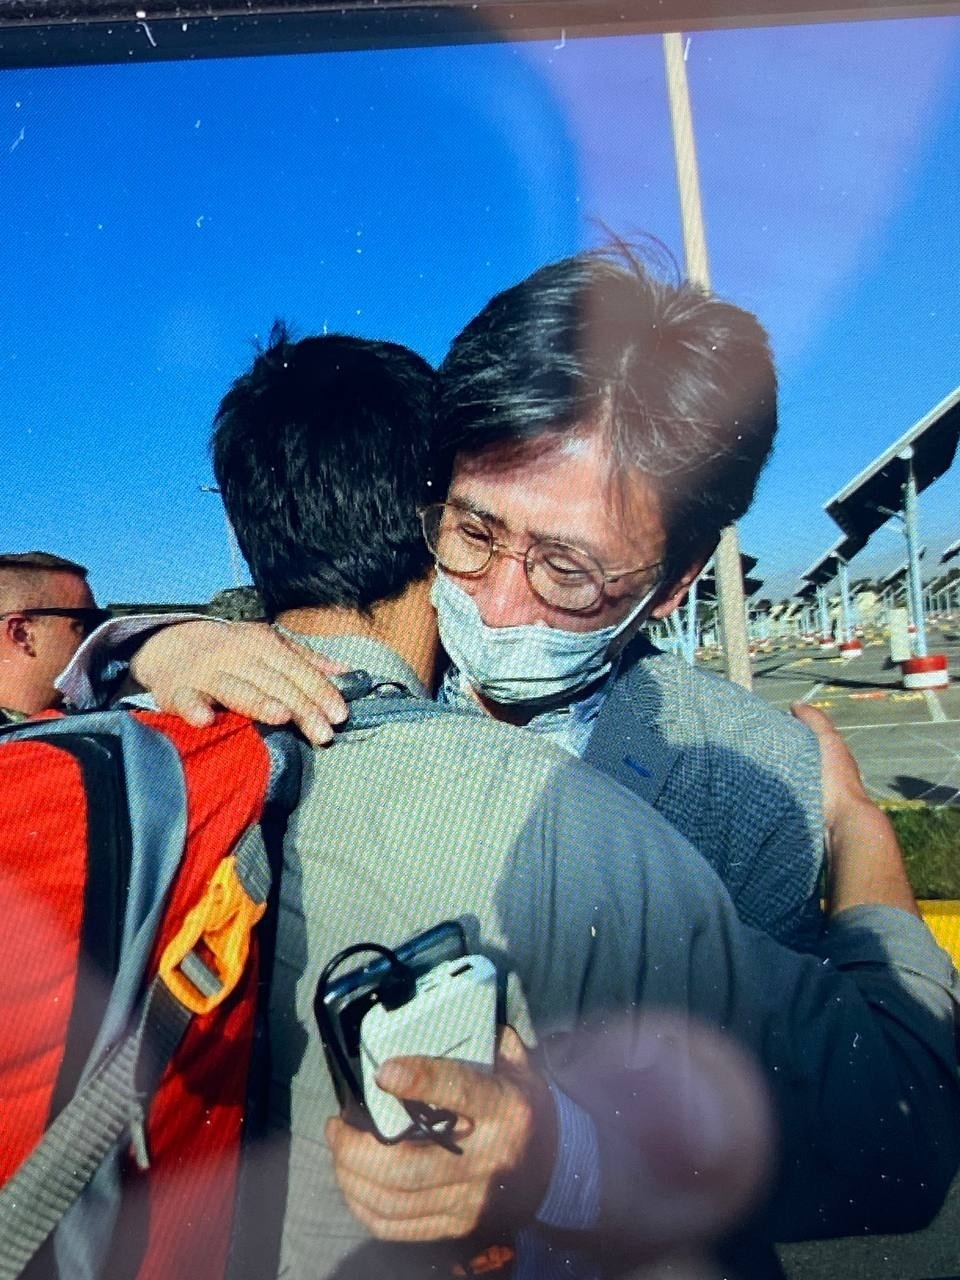 Minister Counselor Kim Il-eung of the South Korean Embassy in Kabul hugs an Afghan as he leads an evacuation mission, in this undated photo, released on Wednesday, by the foreign ministry. (Foreign Ministry)